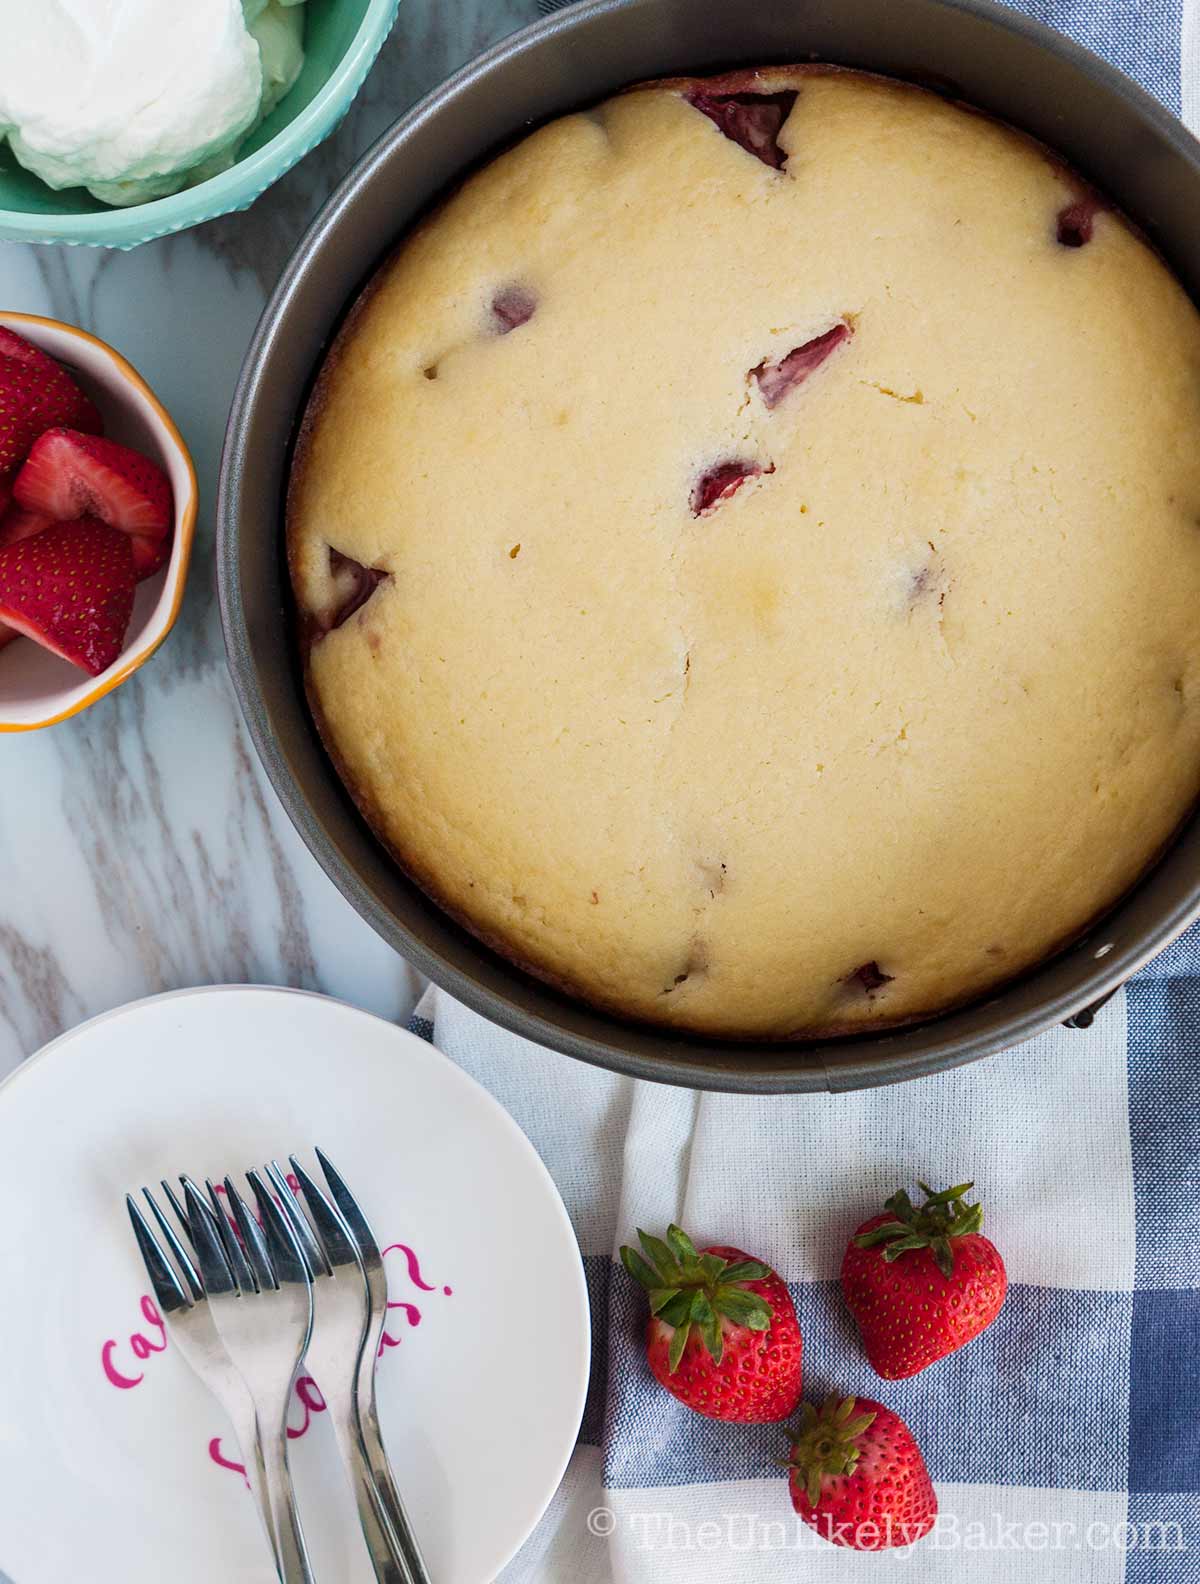 Freshly baked strawberry and ricotta cake in a pan.